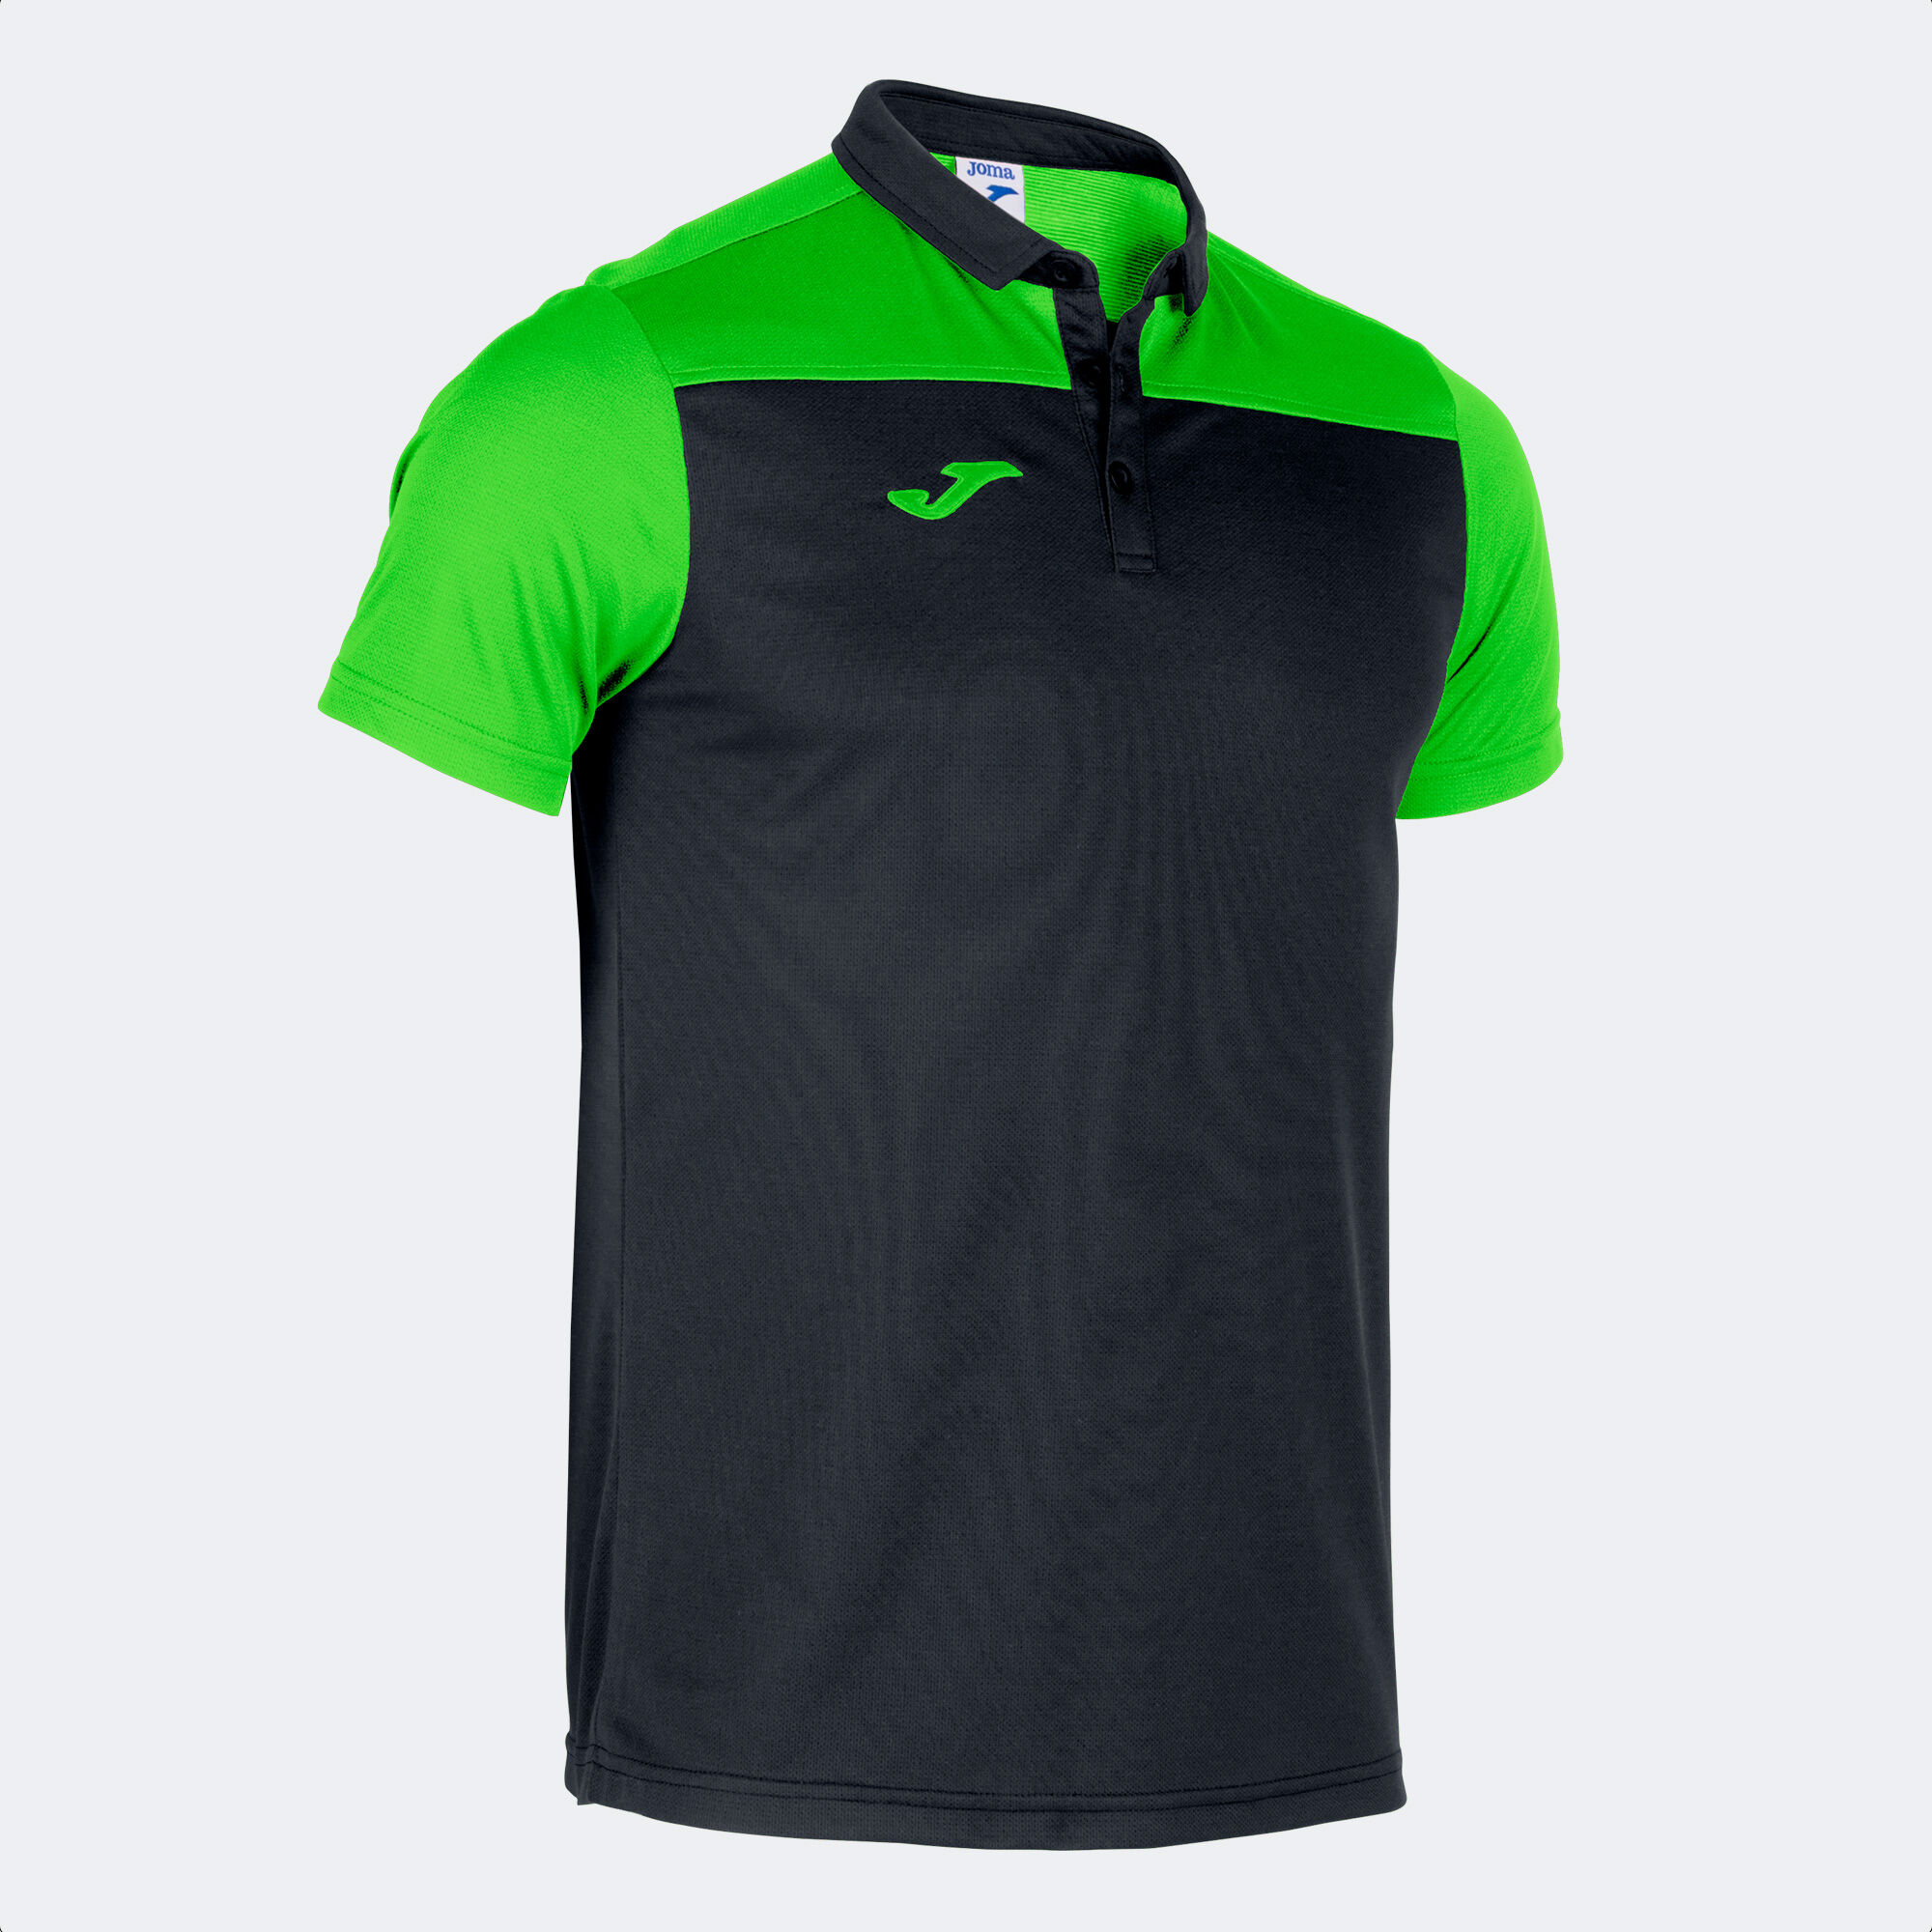 POLO MANCHES COURTES HOMME HOBBY II NOIR VERT FLUO